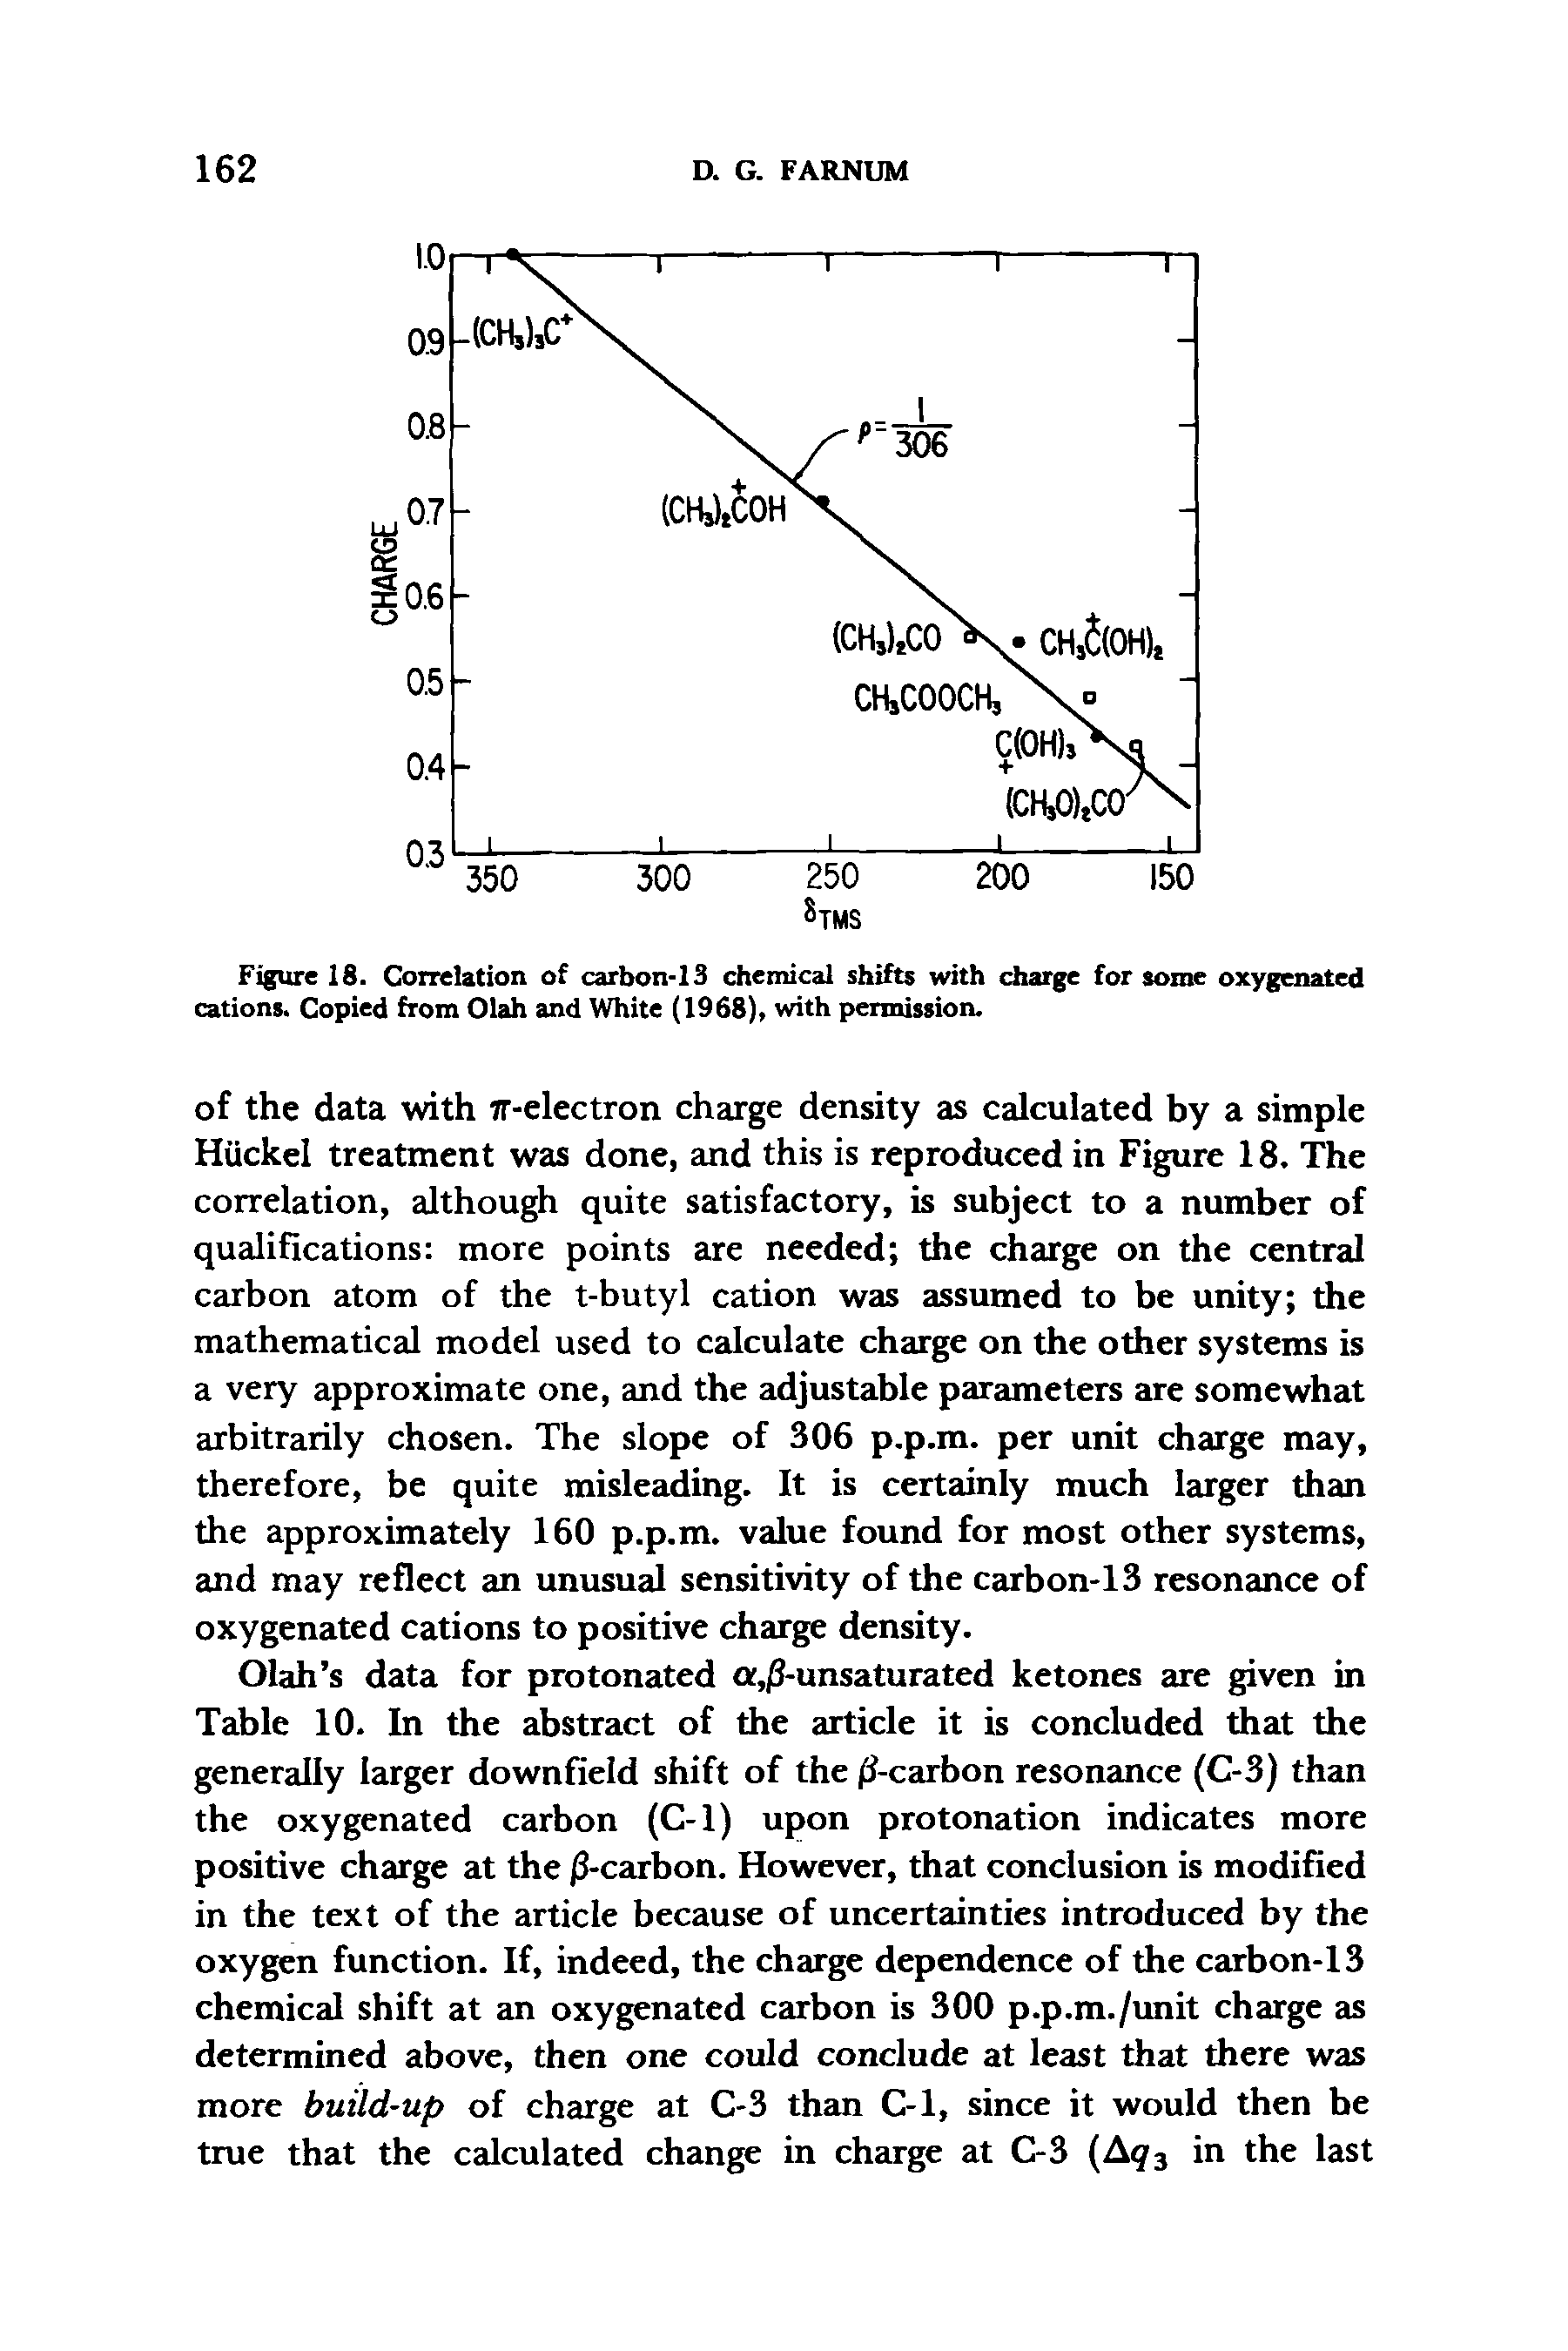 Figure 18. Correlation of carbon-13 chemical shifts with charge for some oxygenated cations. Copied from Olah and White (1968), with permission.